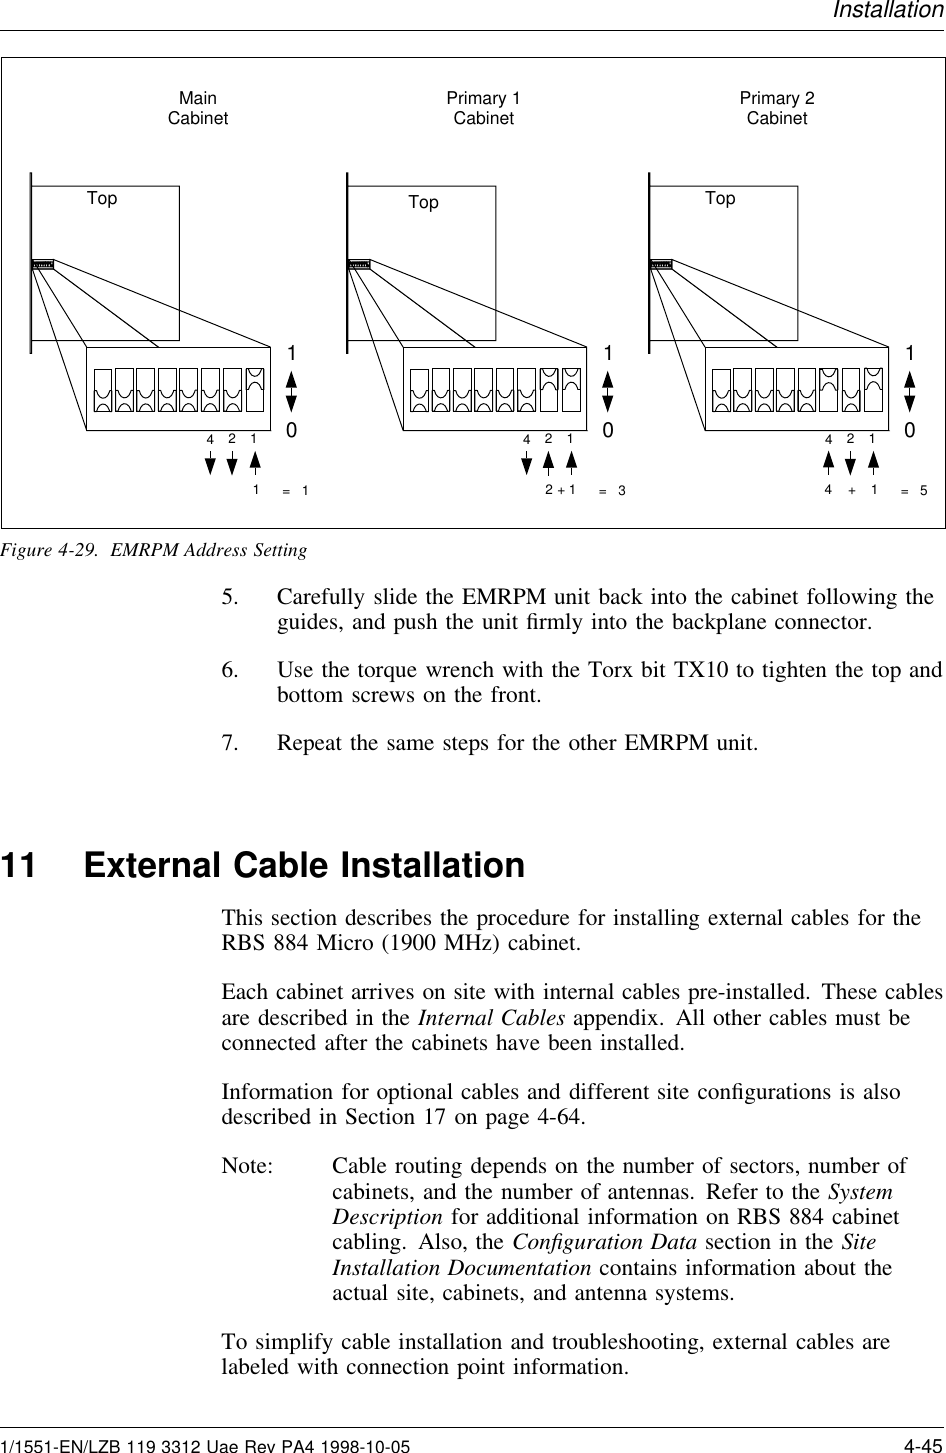 InstallationMainCabinet Primary 1Cabinet Primary 2CabinetTop1012441+=   5Top101241=   1Top101241+=   32Figure 4-29. EMRPM Address Setting5. Carefully slide the EMRPM unit back into the cabinet following theguides, and push the unit ﬁrmly into the backplane connector.6. Use the torque wrench with the Torx bit TX10 to tighten the top andbottom screws on the front.7. Repeat the same steps for the other EMRPM unit.11 External Cable InstallationThis section describes the procedure for installing external cables for theRBS 884 Micro (1900 MHz) cabinet.Each cabinet arrives on site with internal cables pre-installed. These cablesare described in the Internal Cables appendix. All other cables must beconnected after the cabinets have been installed.Information for optional cables and different site conﬁgurations is alsodescribed in Section 17 on page 4-64.Note: Cable routing depends on the number of sectors, number ofcabinets, and the number of antennas. Refer to the SystemDescription for additional information on RBS 884 cabinetcabling. Also, the Conﬁguration Data section in the SiteInstallation Documentation contains information about theactual site, cabinets, and antenna systems.To simplify cable installation and troubleshooting, external cables arelabeled with connection point information.1/1551-EN/LZB 119 3312 Uae Rev PA4 1998-10-05 4-45